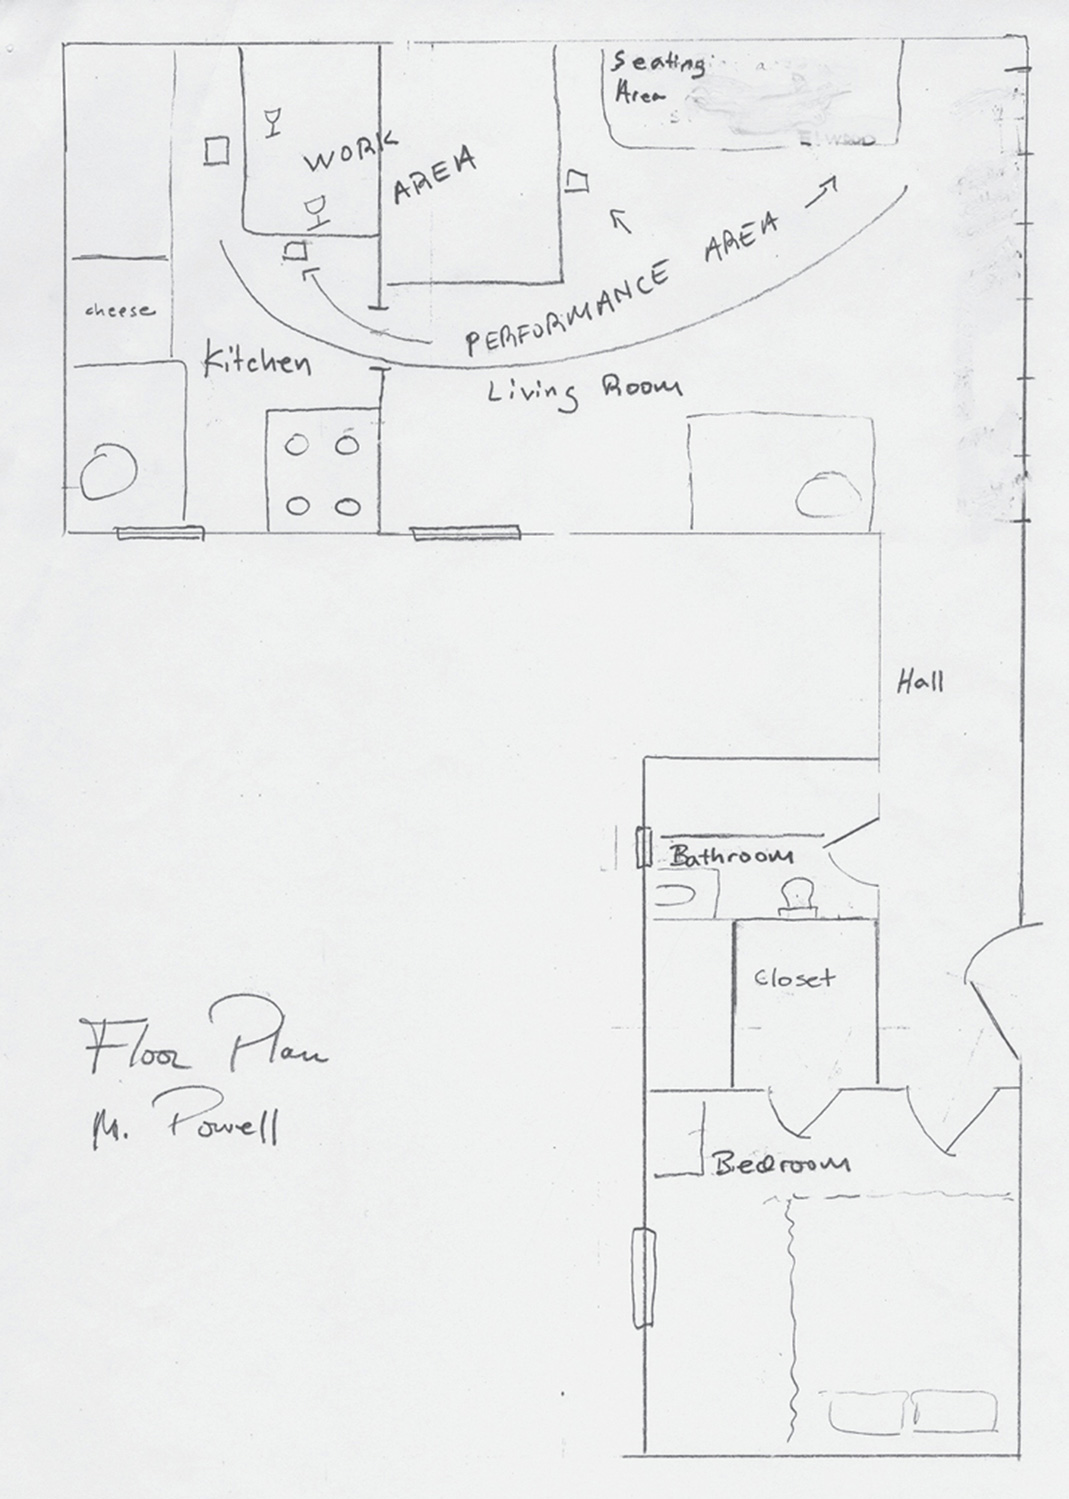 A sketch of Molly Powell’s apartment, where she performed her job.